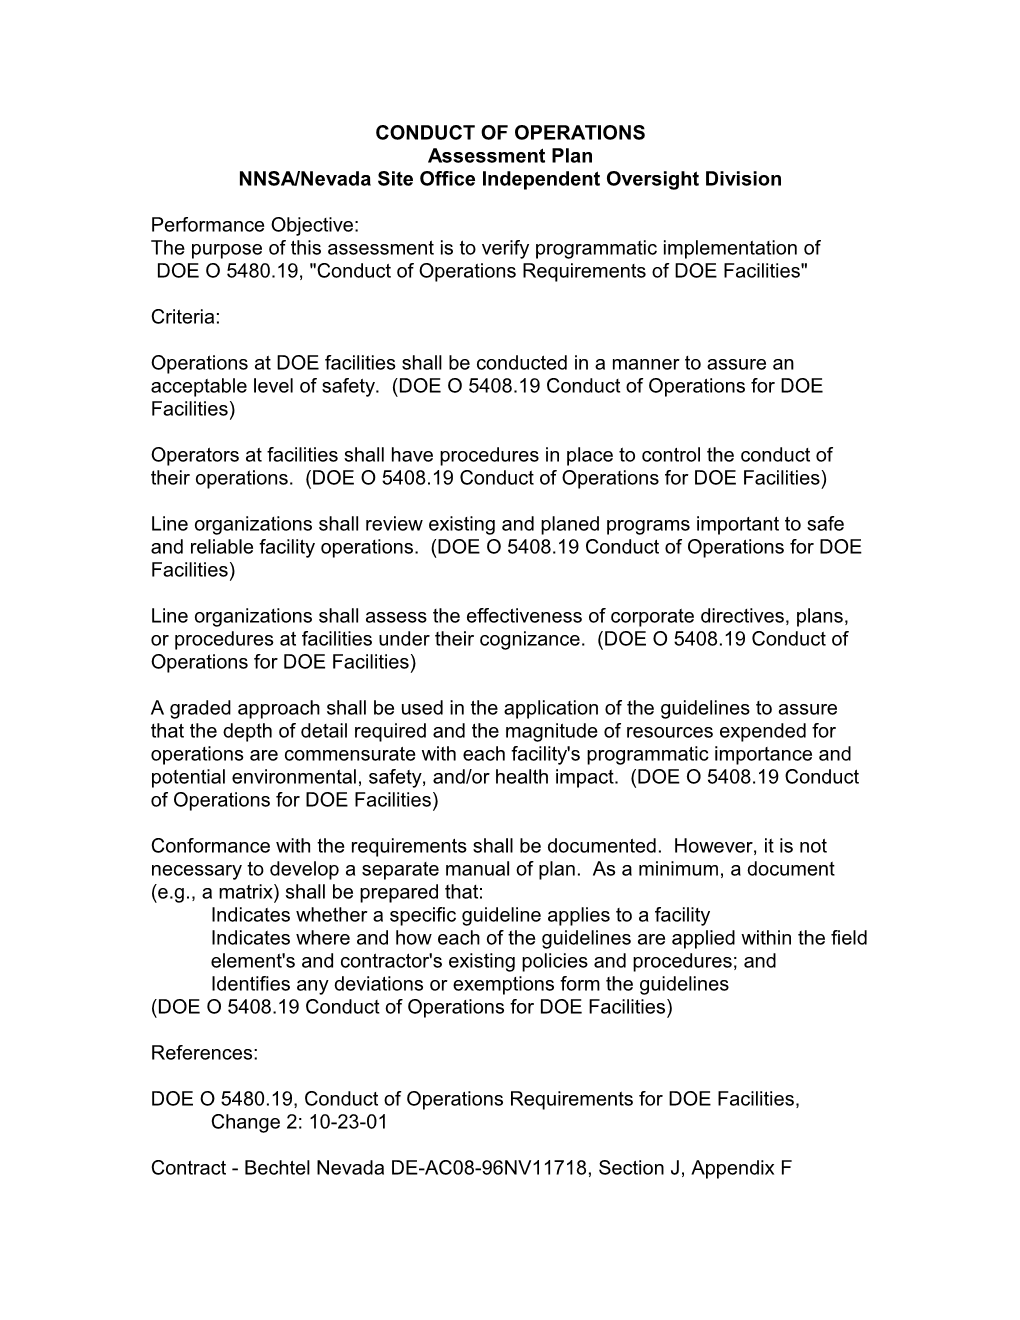 Conduct Operations Assessment Plan - Developed by NNSA/Nevada Site Office Independent Oversight